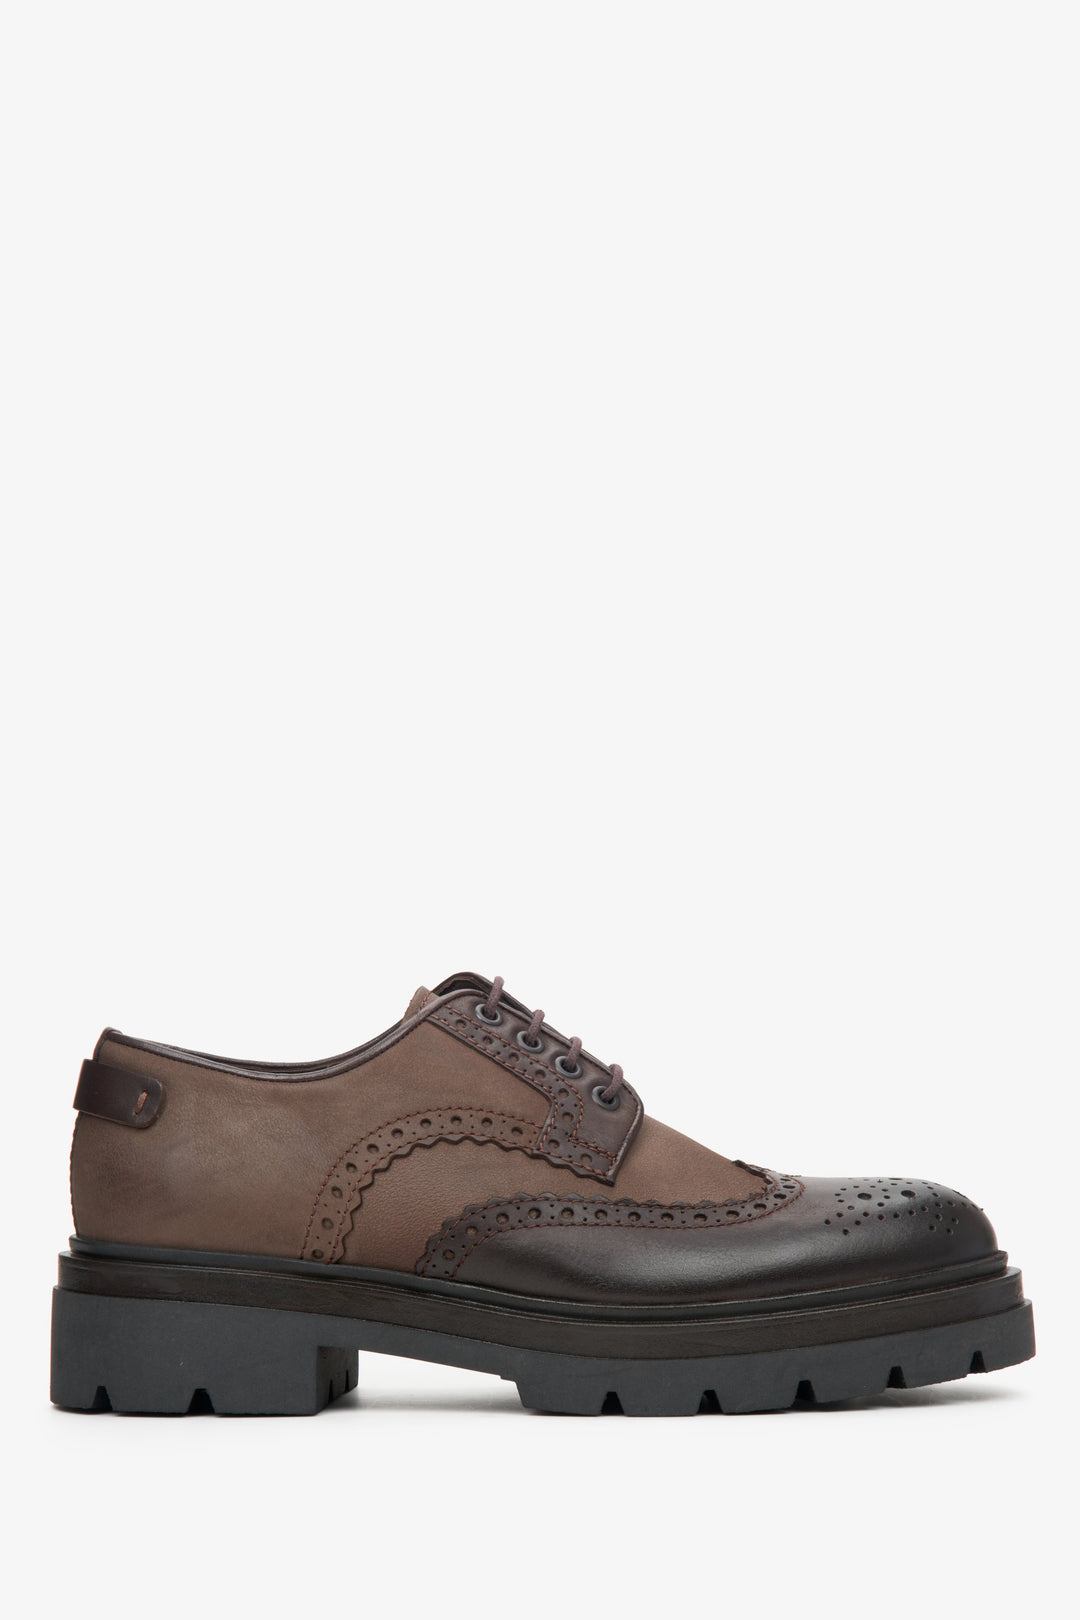 Men's Brown Leather Oxford Boots with Lacing Estro ER00113793.